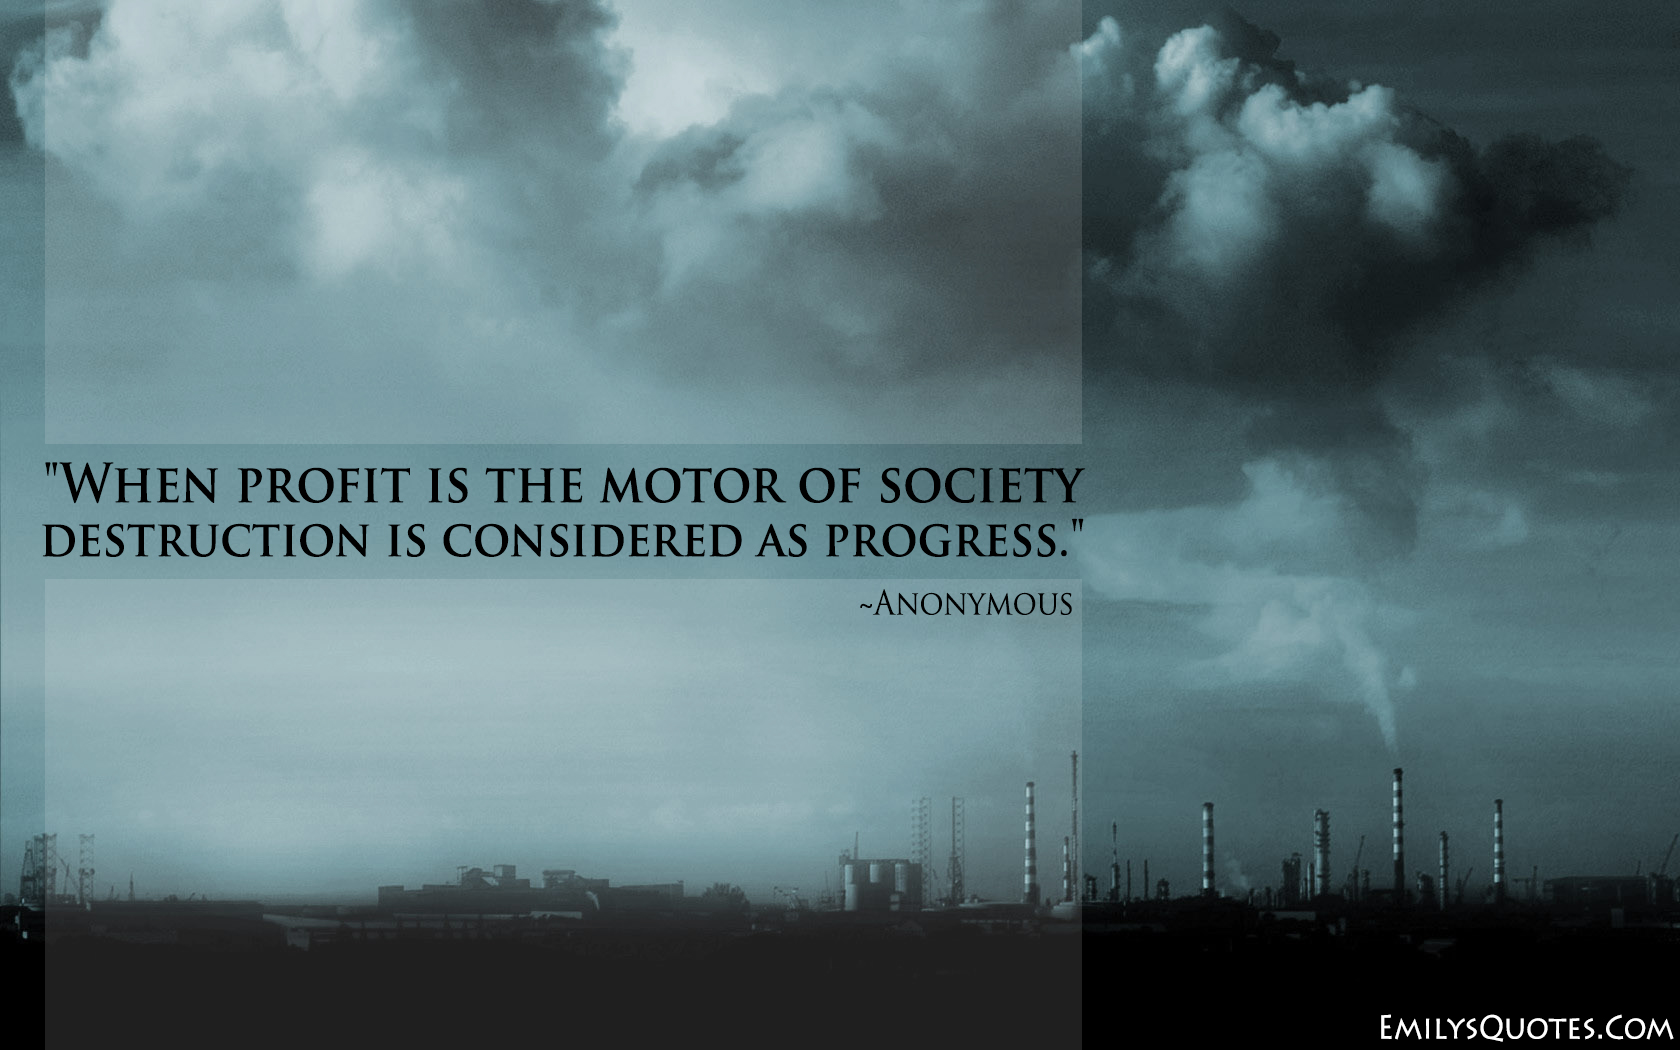 When profit is the motor of society destruction is considered as